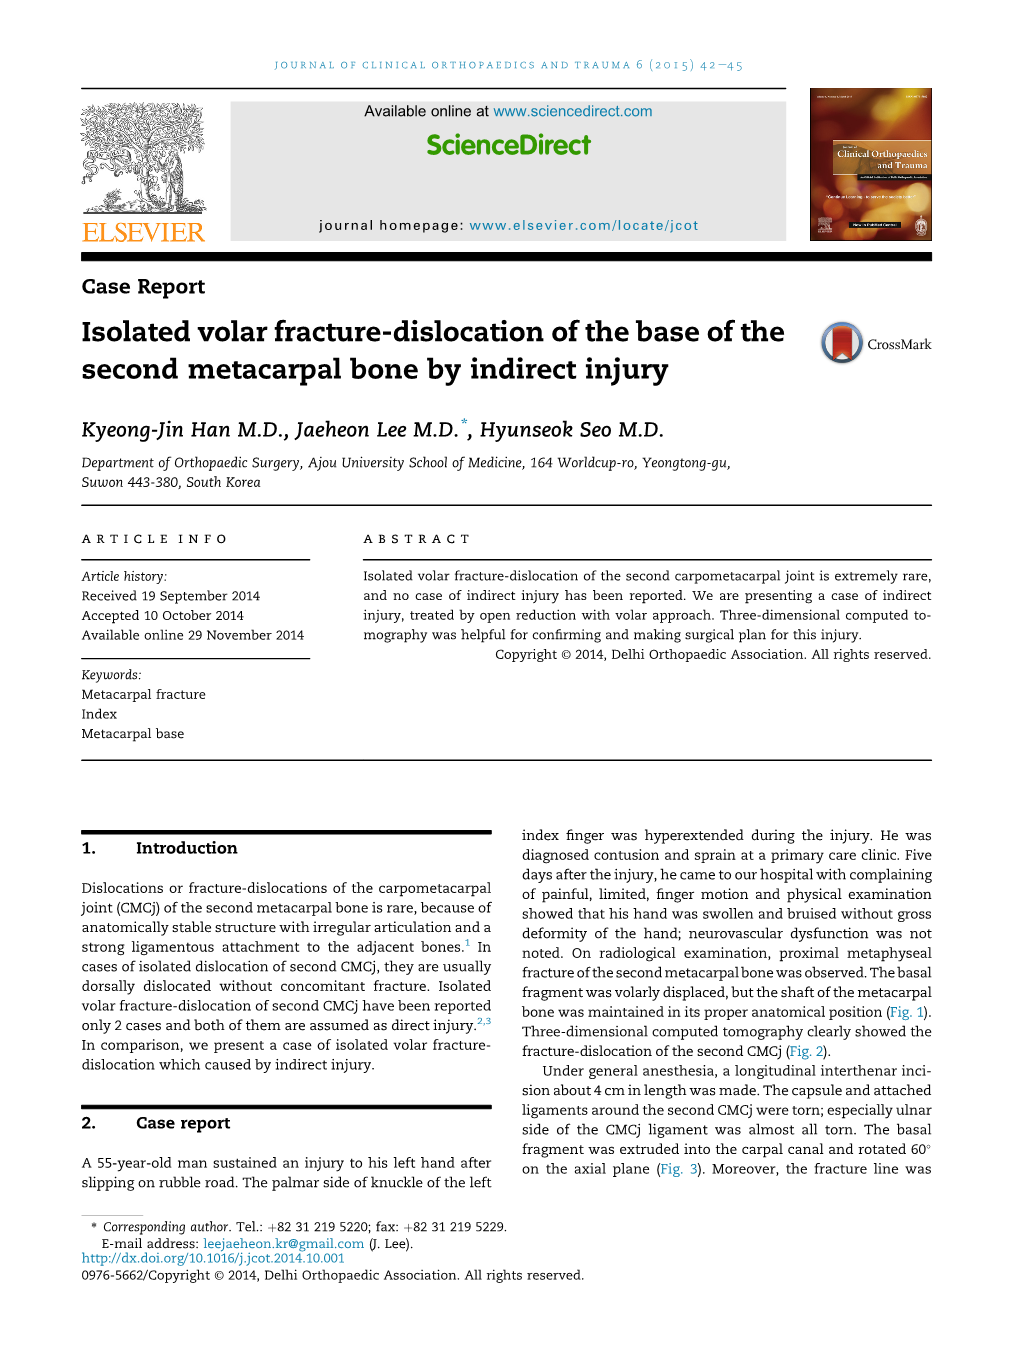 Isolated Volar Fracture-Dislocation of the Base of the Second Metacarpal Bone by Indirect Injury